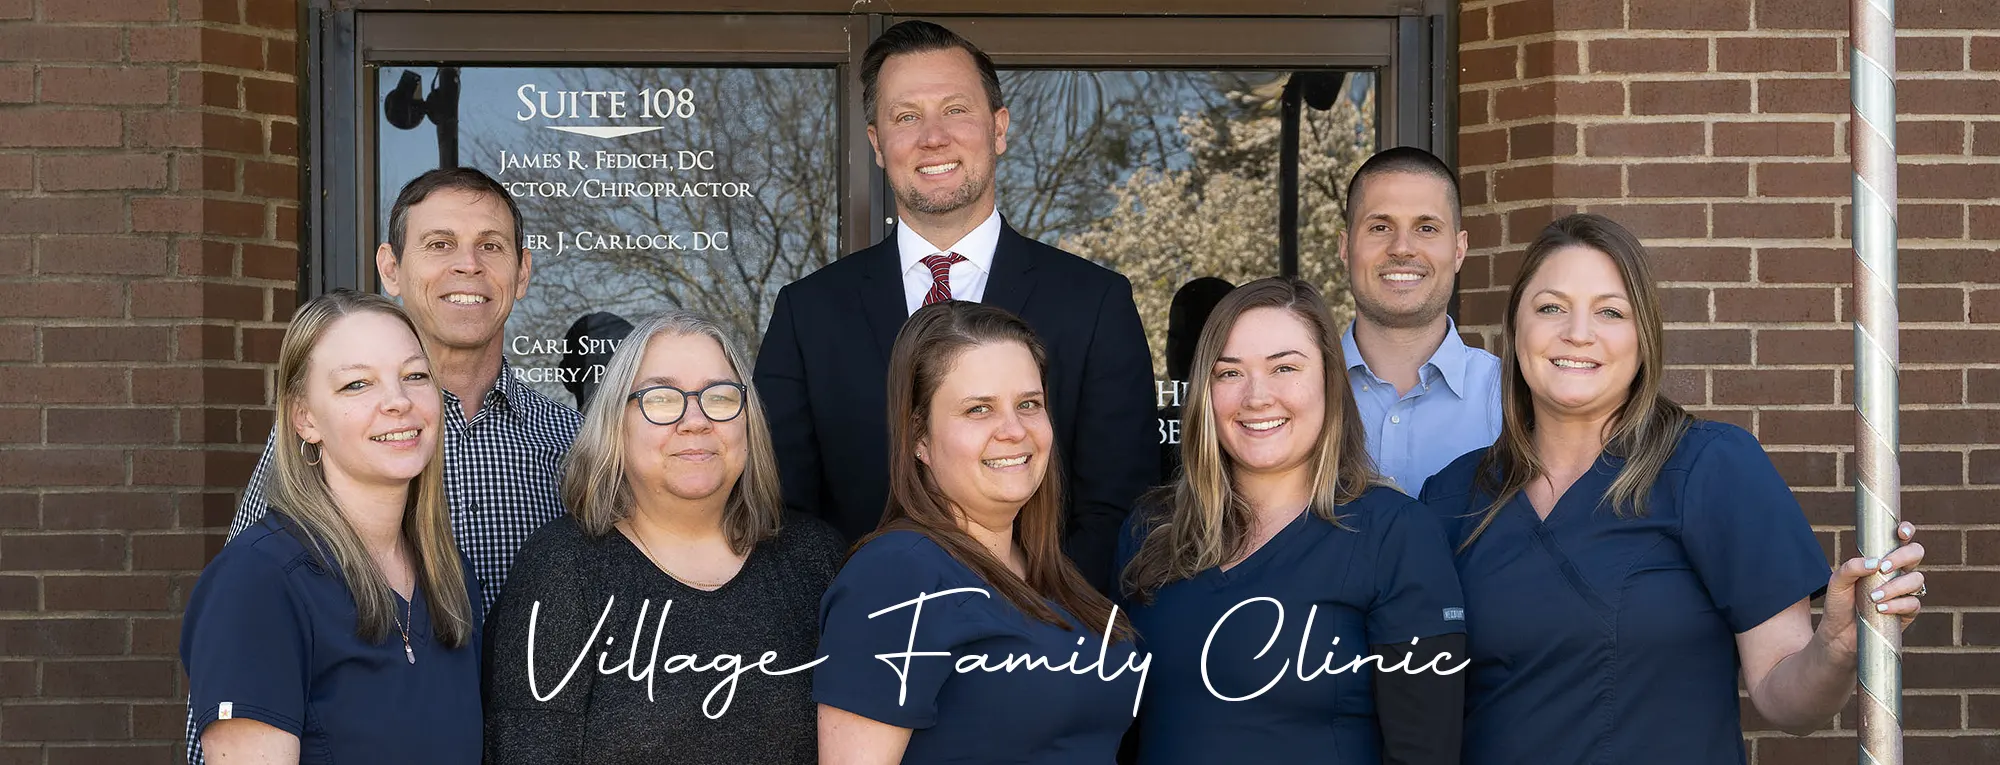 Village Family Clinic Success Stories